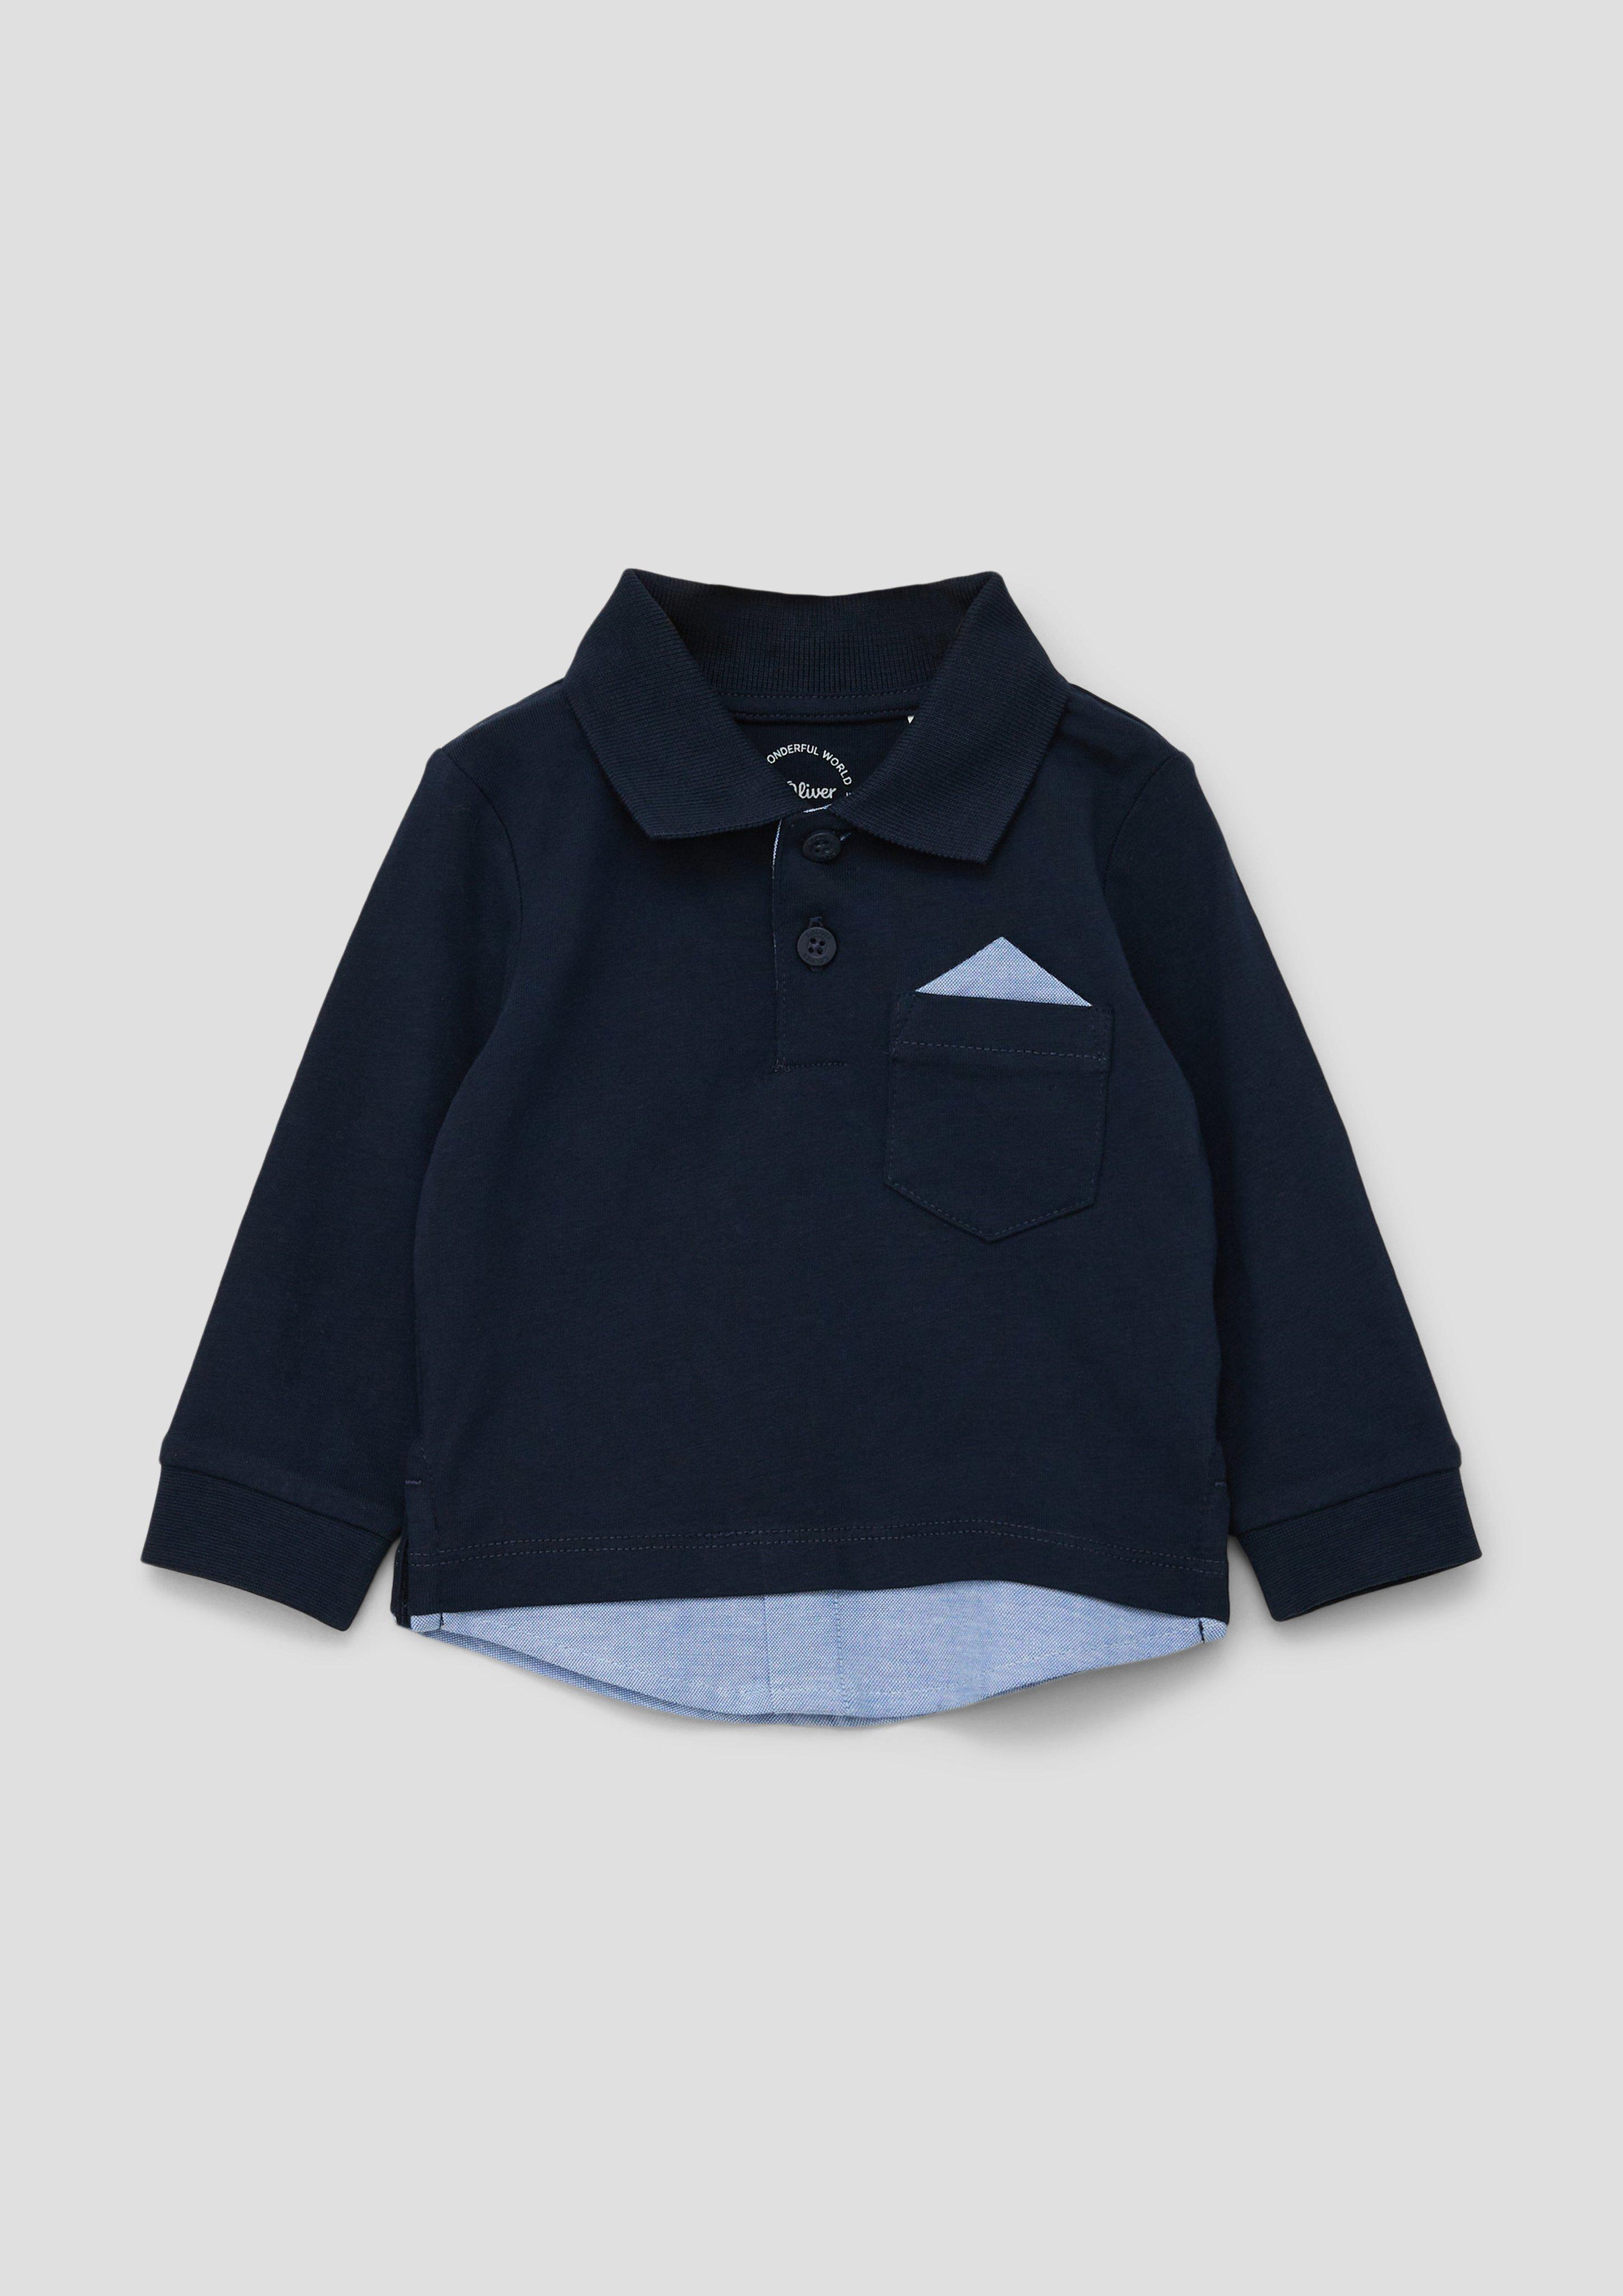 Polo shirt in a layered look - navy